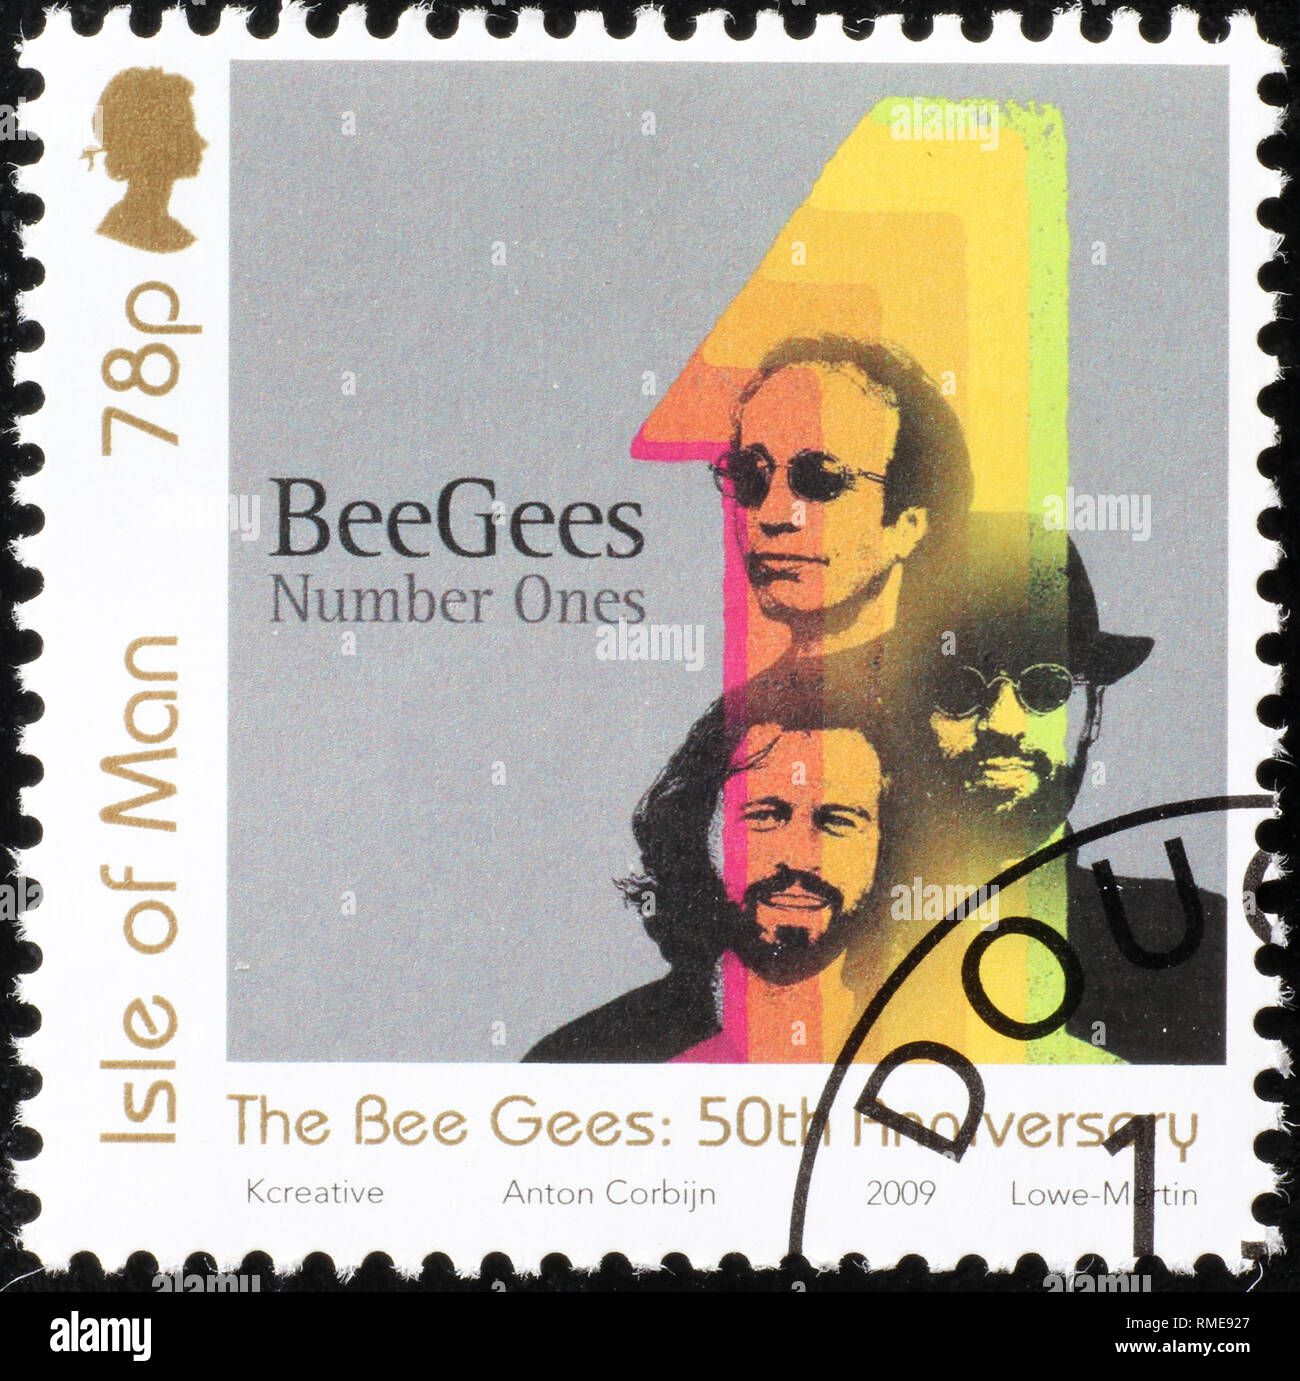 Cover of LP Number Ones by Bee Gees on stamp Stock Photo